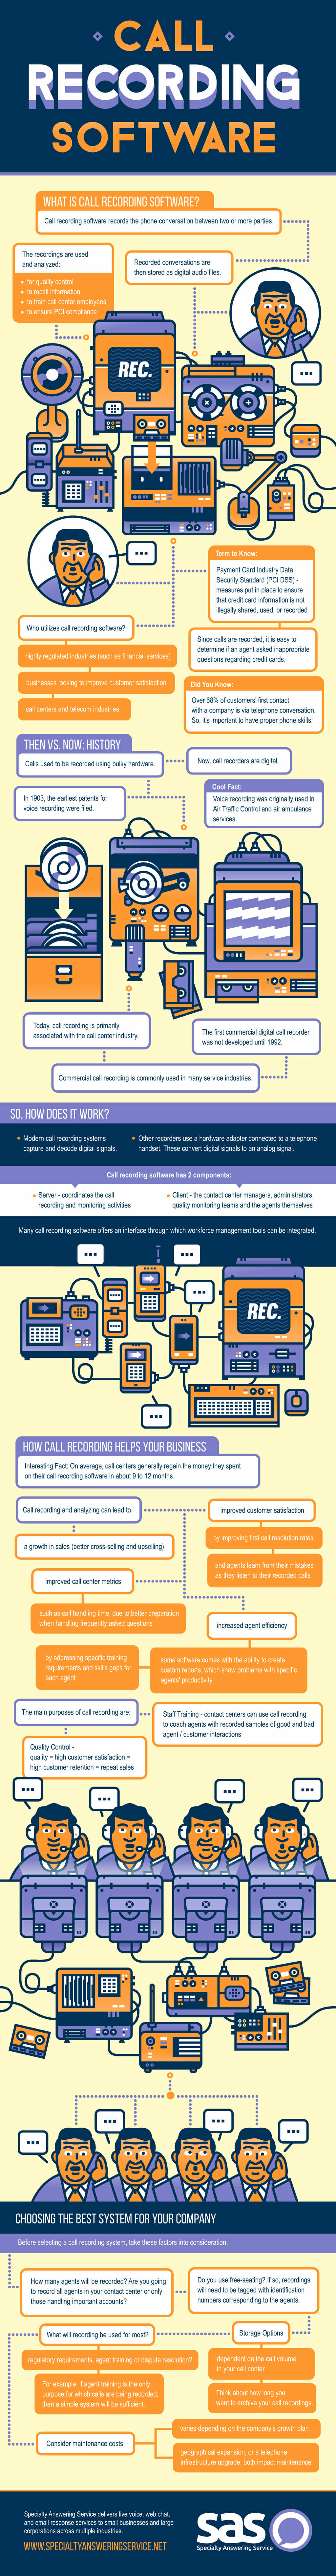 Call Recording Software Infographic